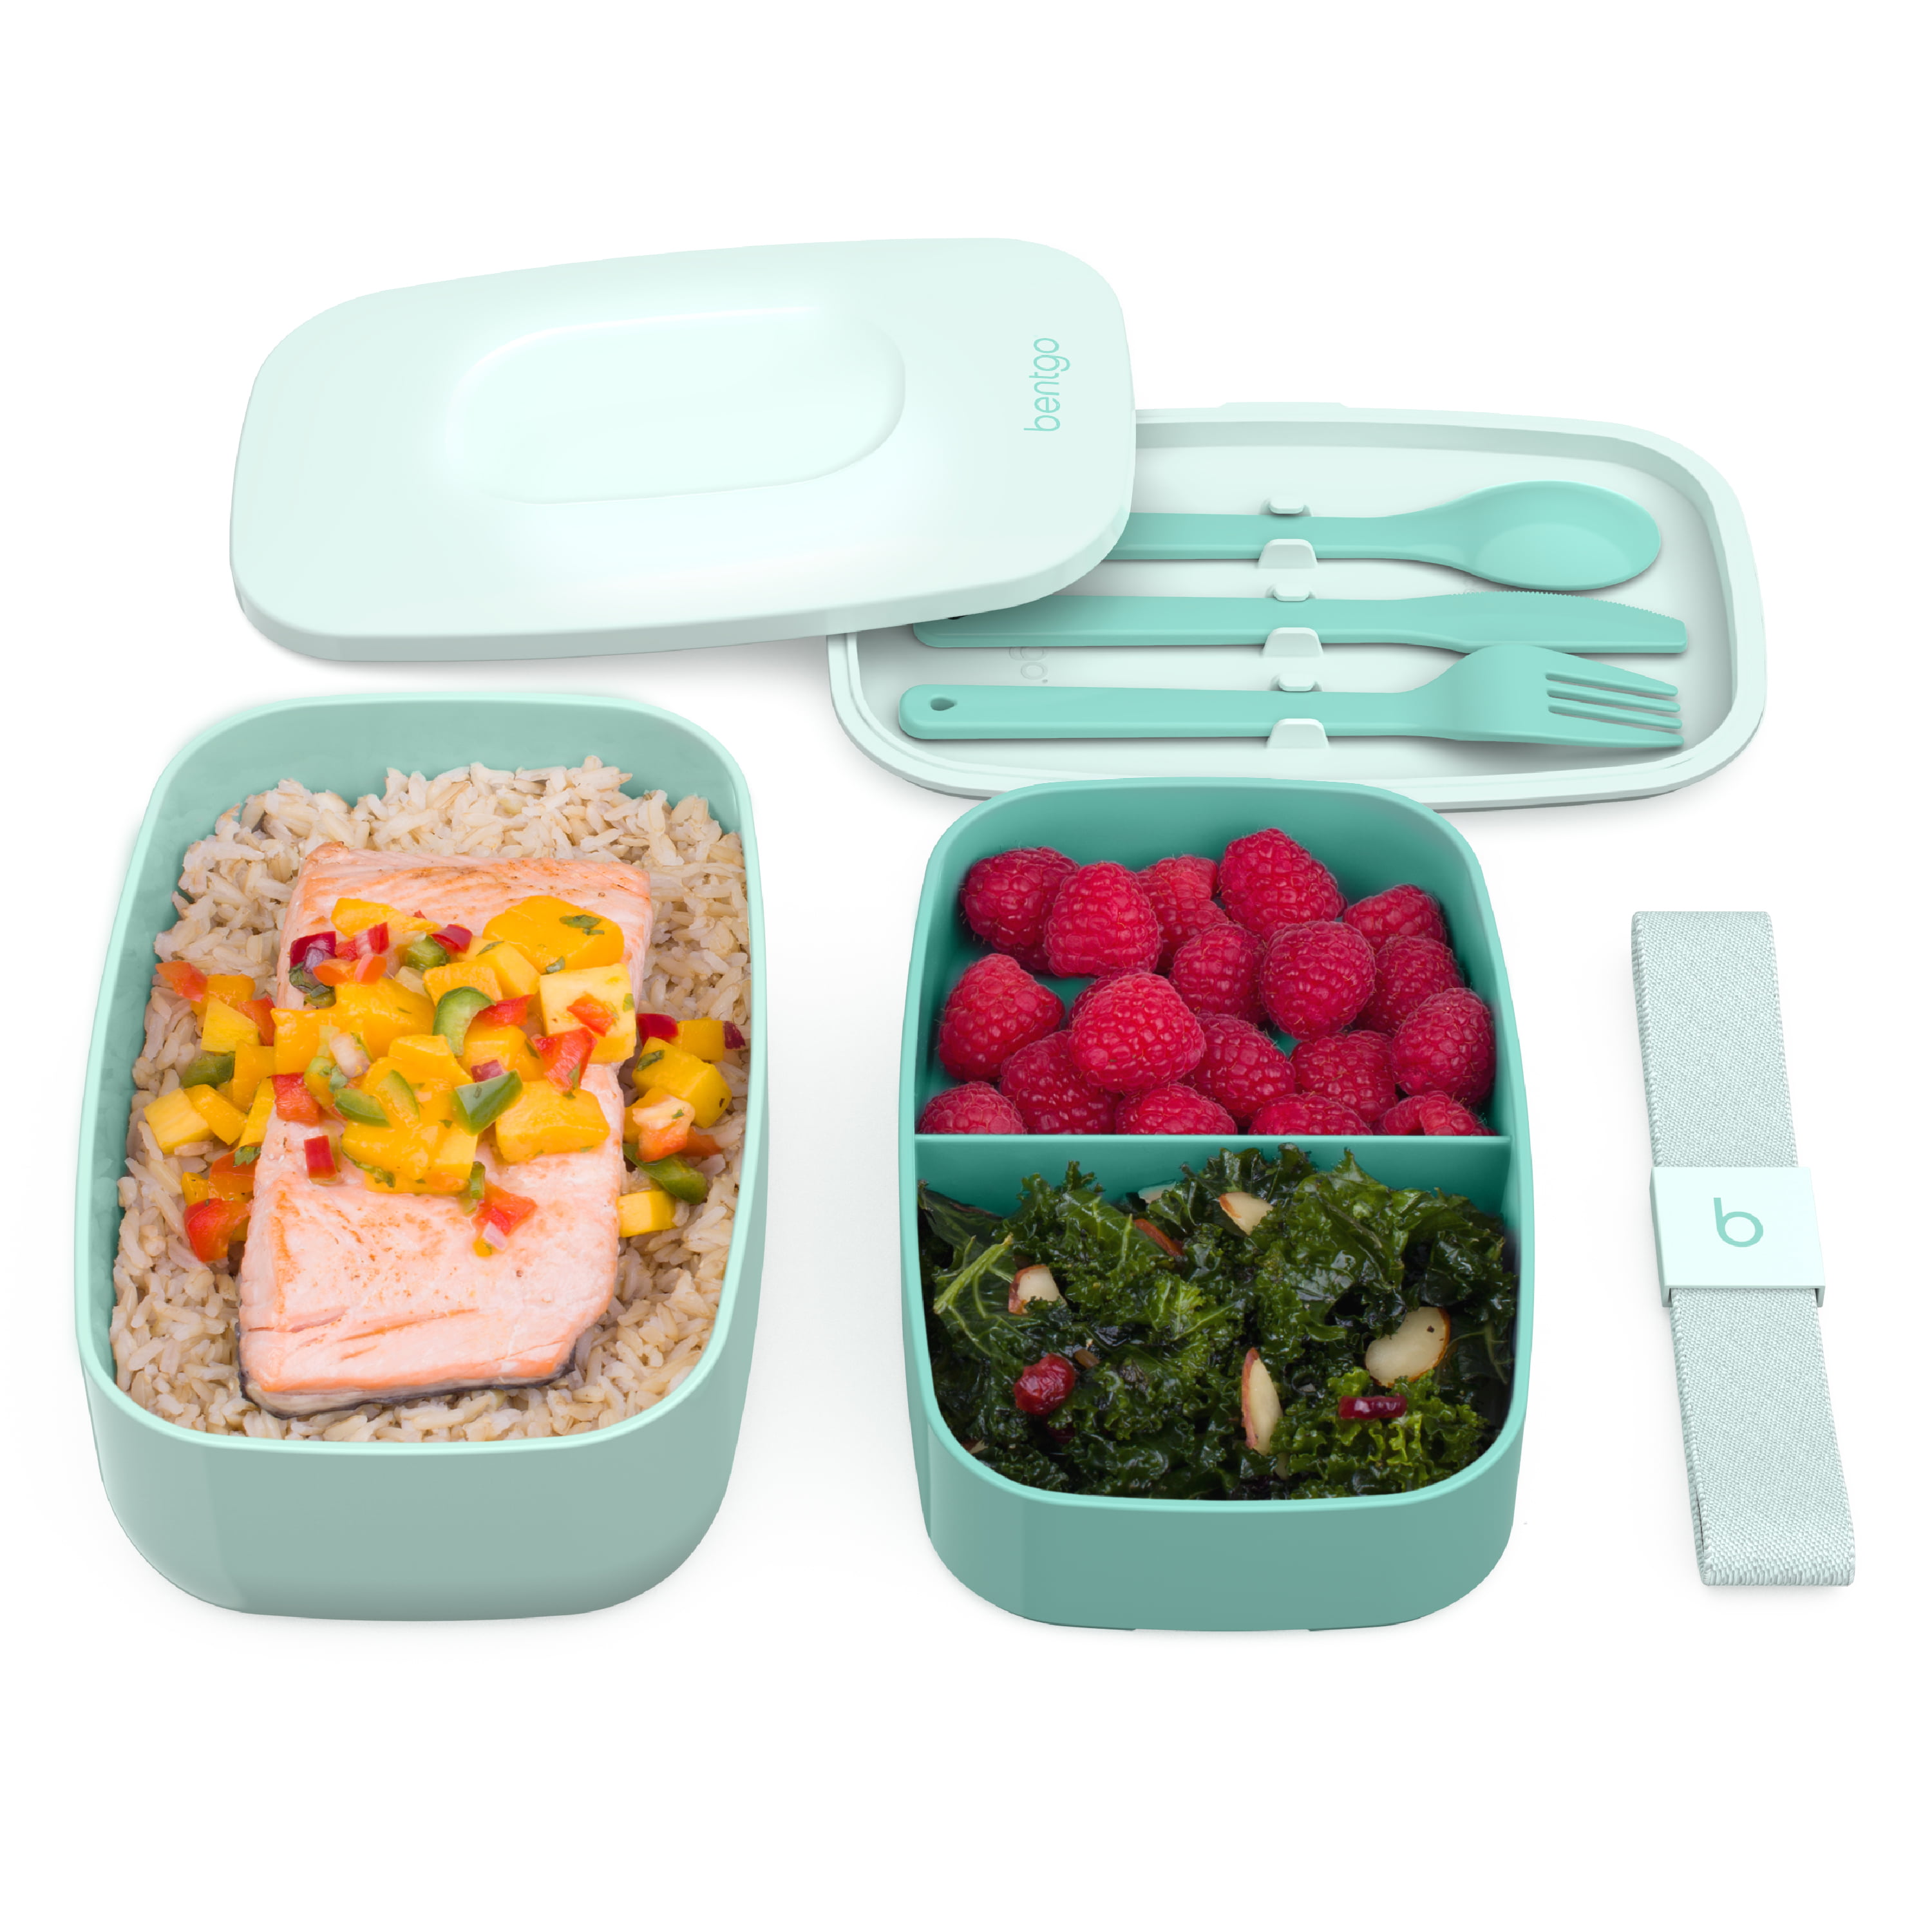 Bentgo Classic AlI-In-One Stackable Lunch Box- Gray - Shop Lunch Boxes at  H-E-B